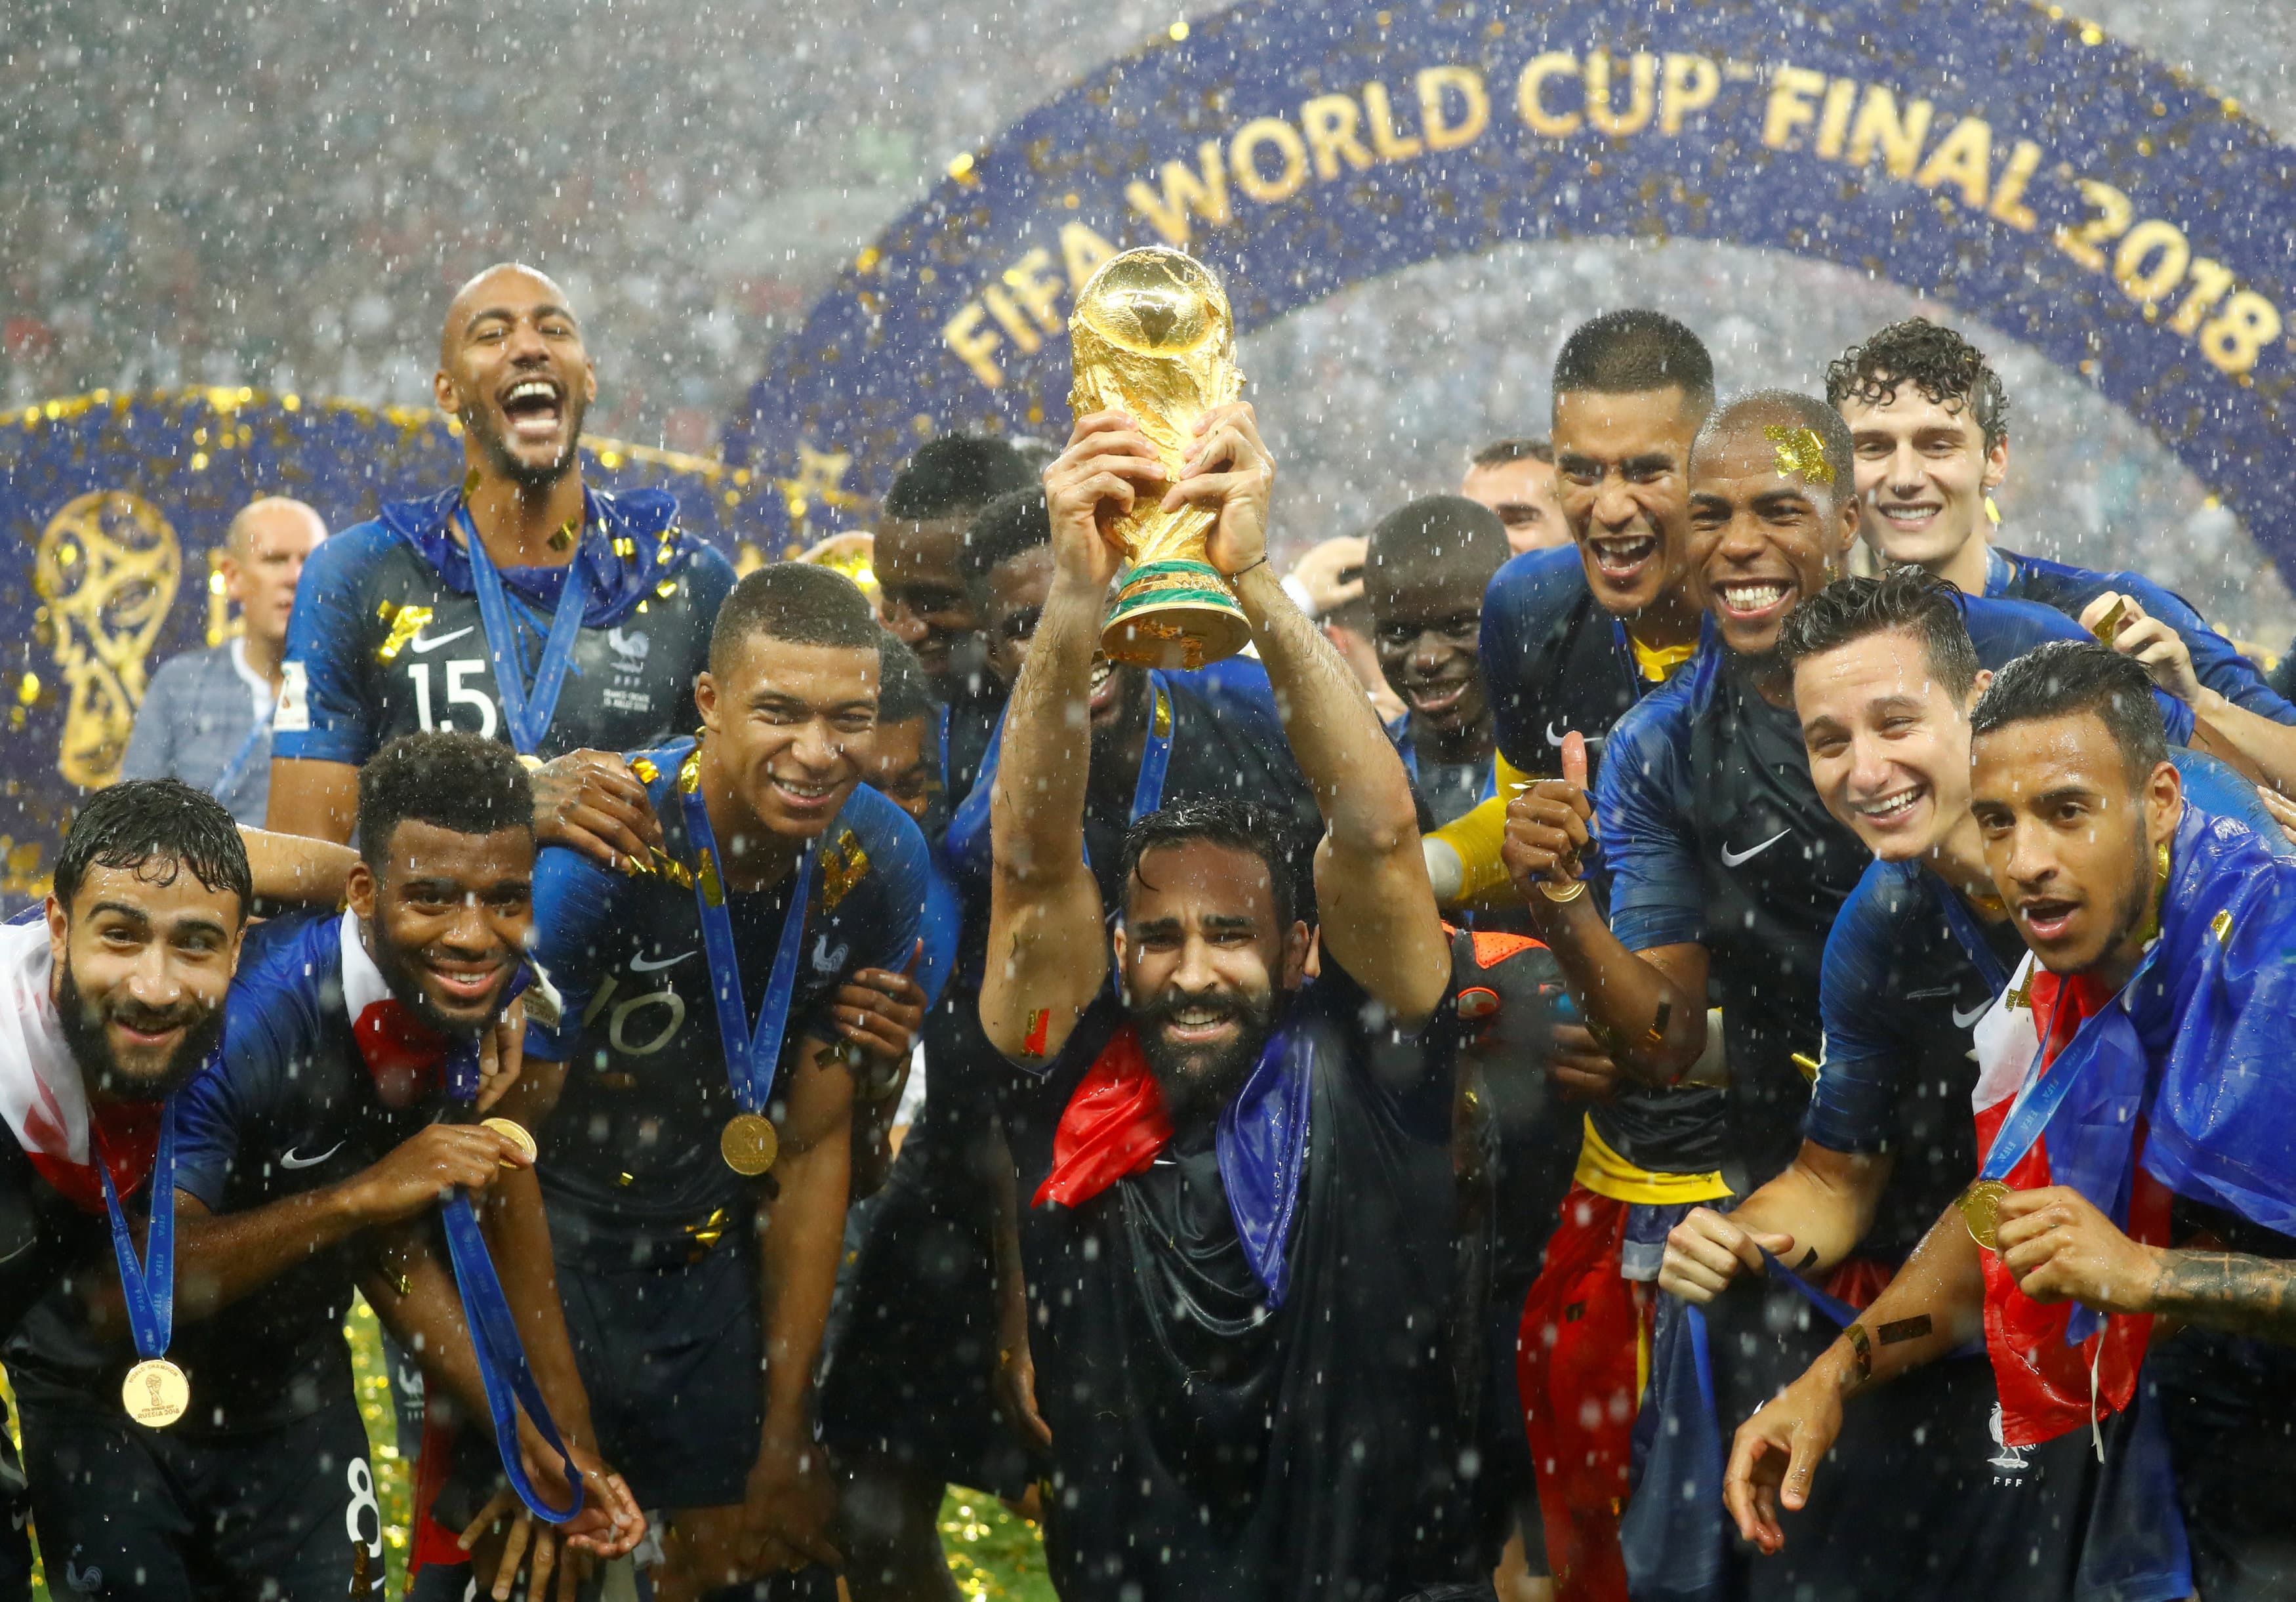 Soccer: France lift second World Cup after winning classic final 4-2 - TVTS